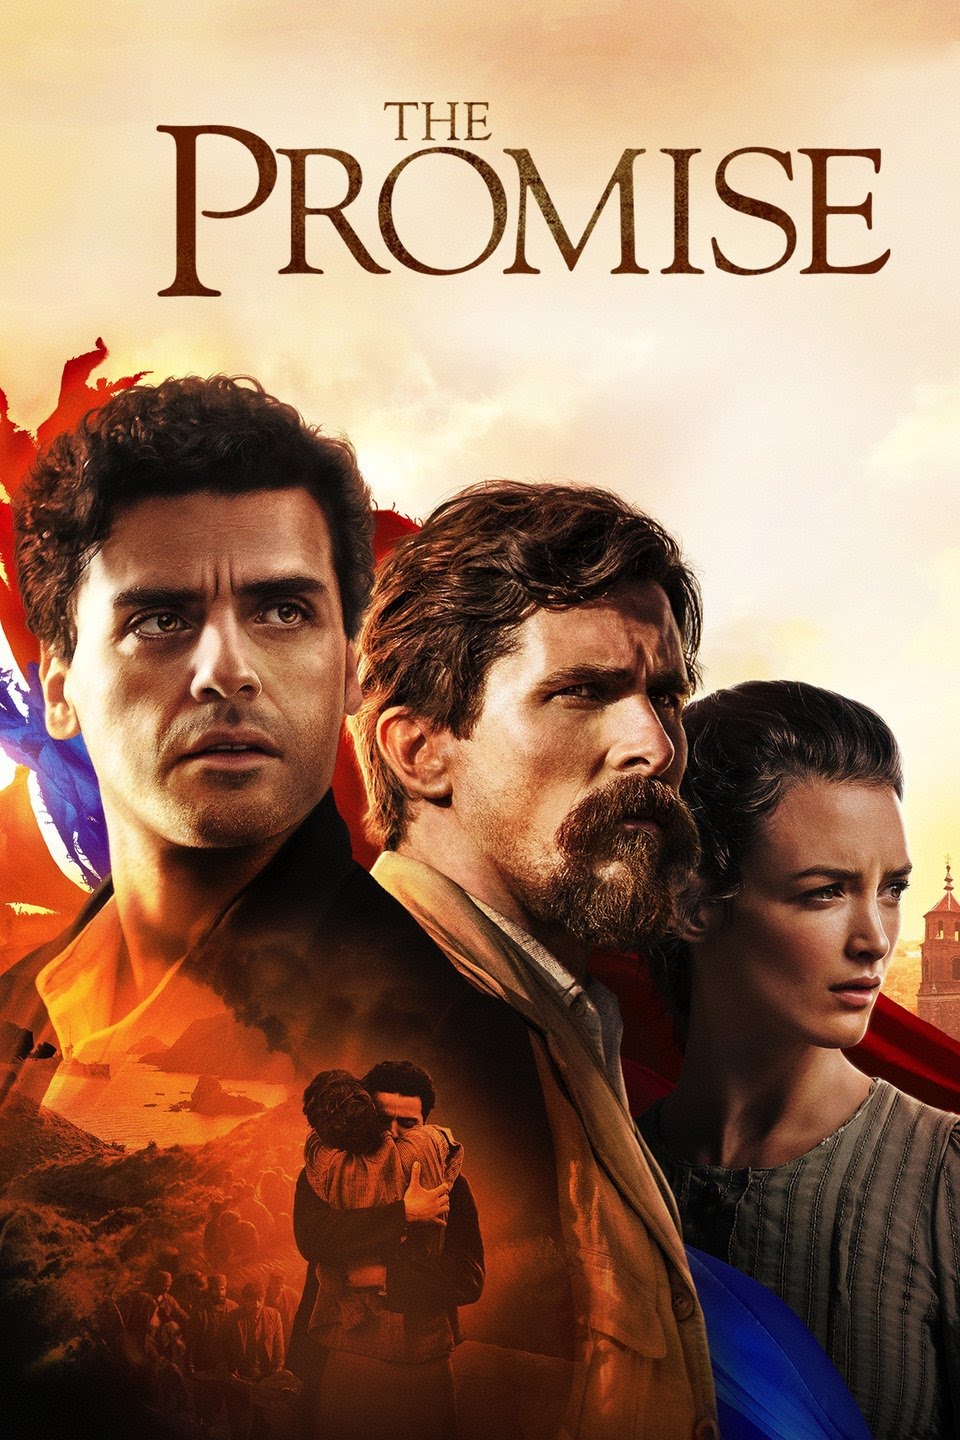 The Promise (2016) Vudu or Movies Anywhere HD redemption only